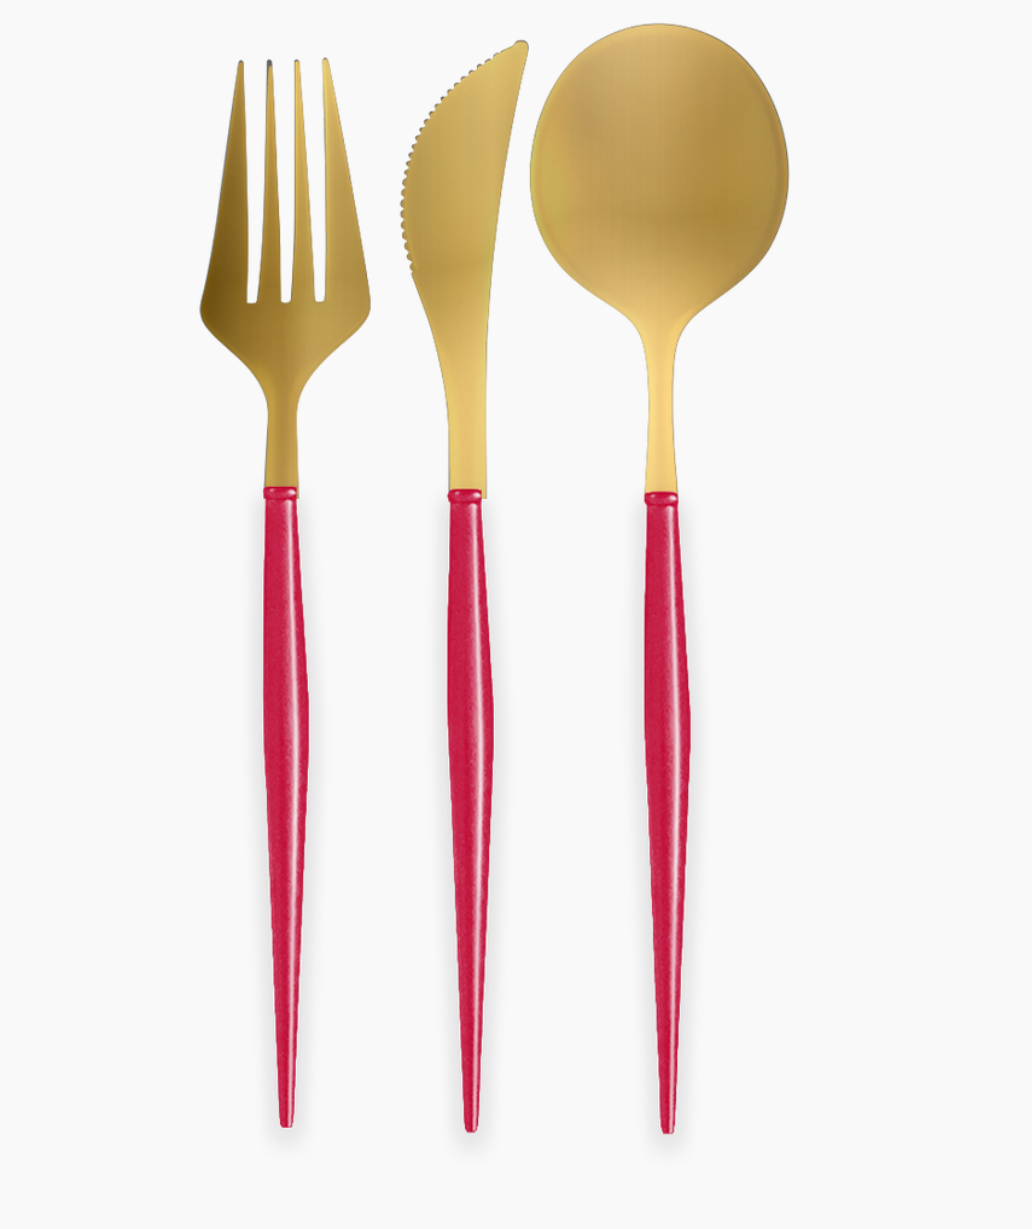 Reusable Plastic Cutlery Gold/Bright Red Handles S/24